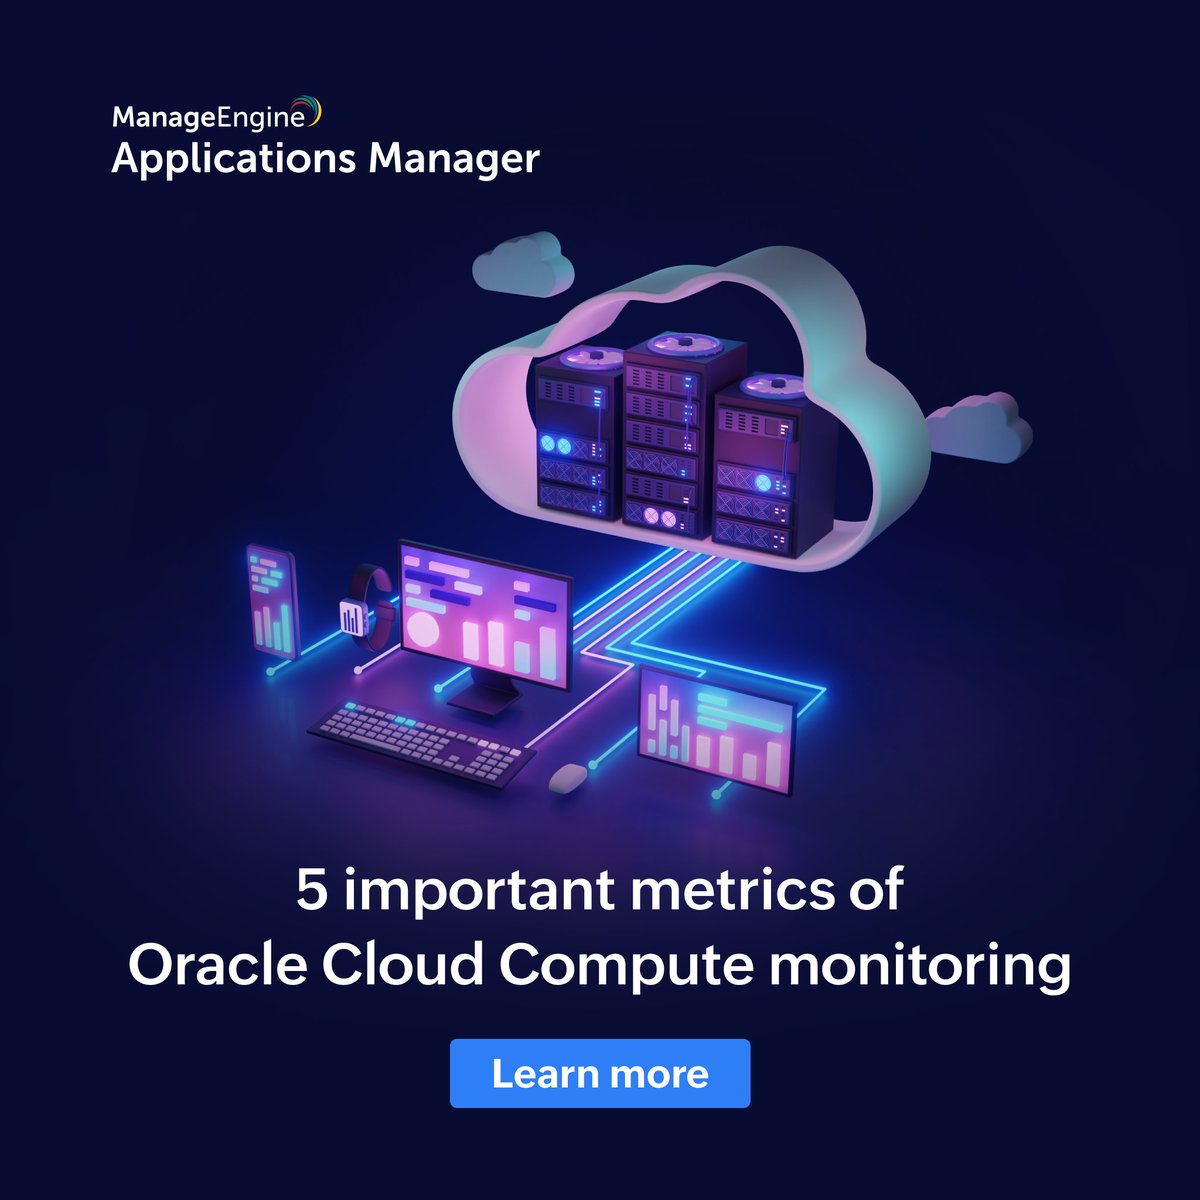 Learn about the key performance metrics you need to look out for while monitoring your Oracle Cloud Compute instances at: blogs.manageengine.com/application-pe…

#ManageEngine #ApplicationsManager #CloudMonitoring #OracleCloud